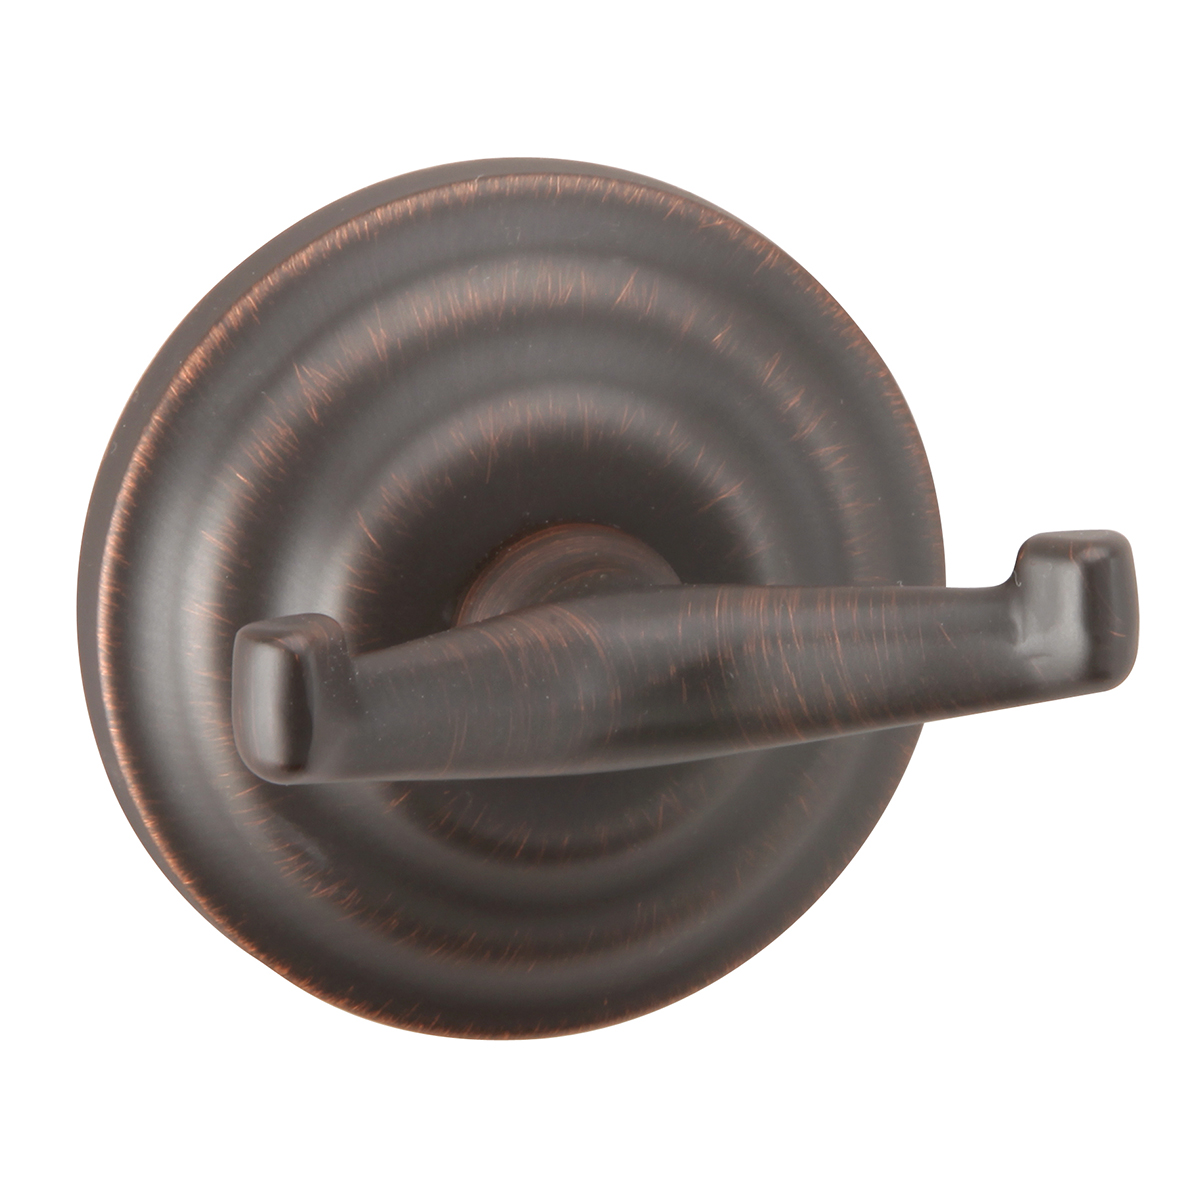 Brentwood - Double Robe Hook - Double Robe Hook - Oil Rubbed Bronze